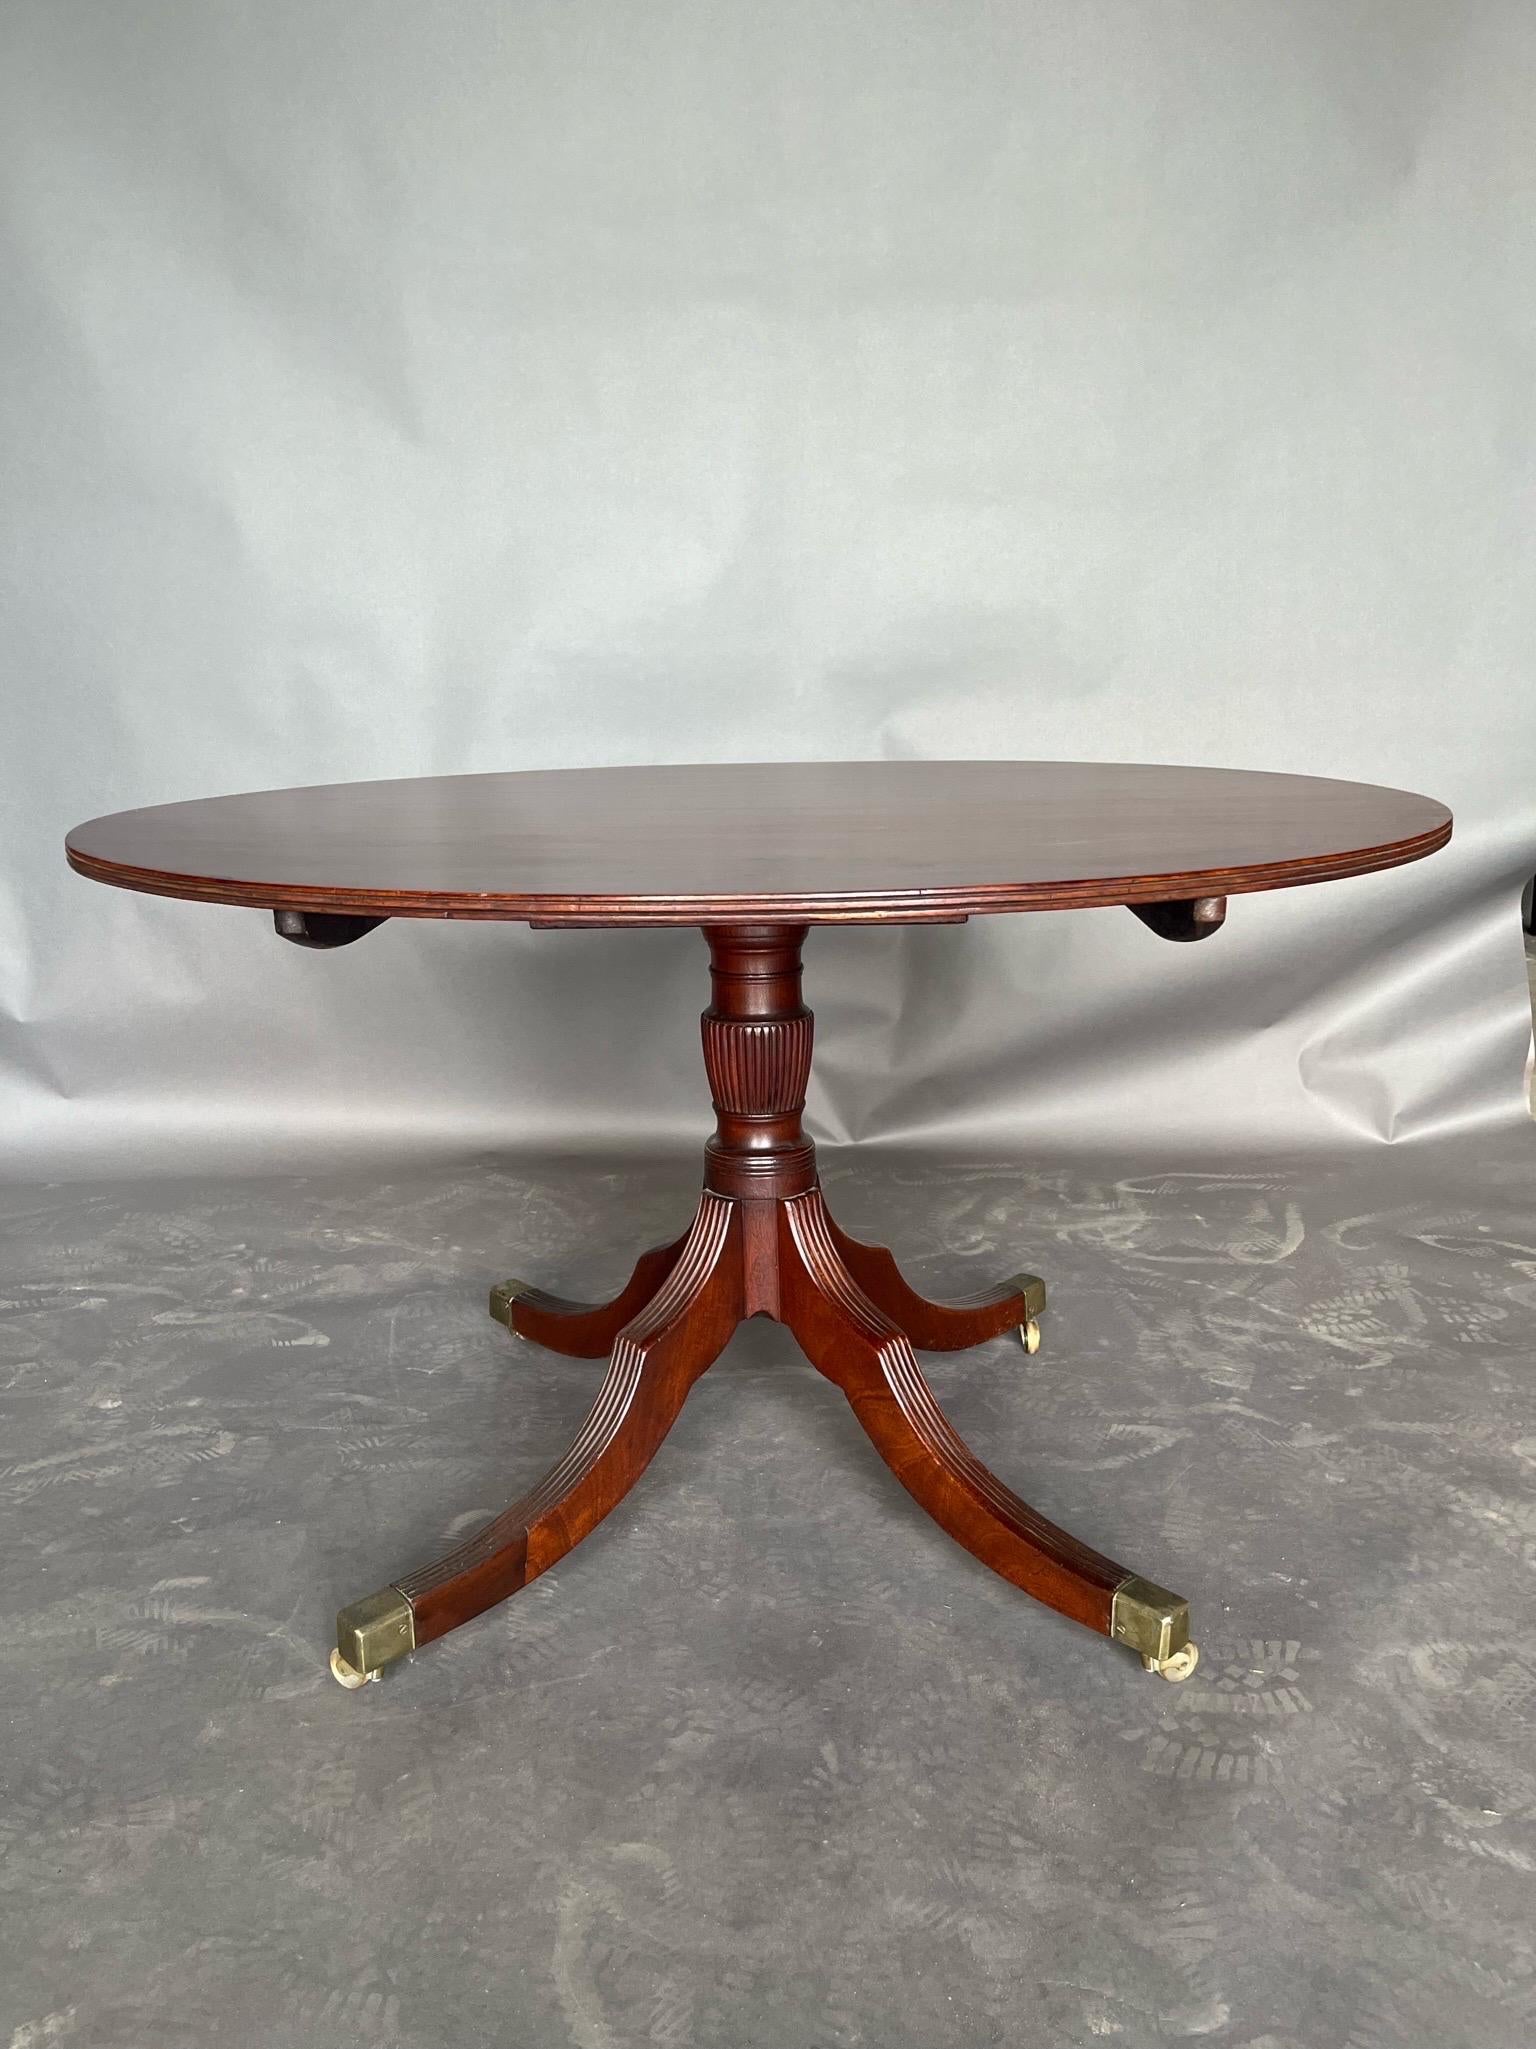 19th century English Regency period oval mahogany breakfast table or center table. Fabulous color and grain top, nice reeded legs and original castors. 